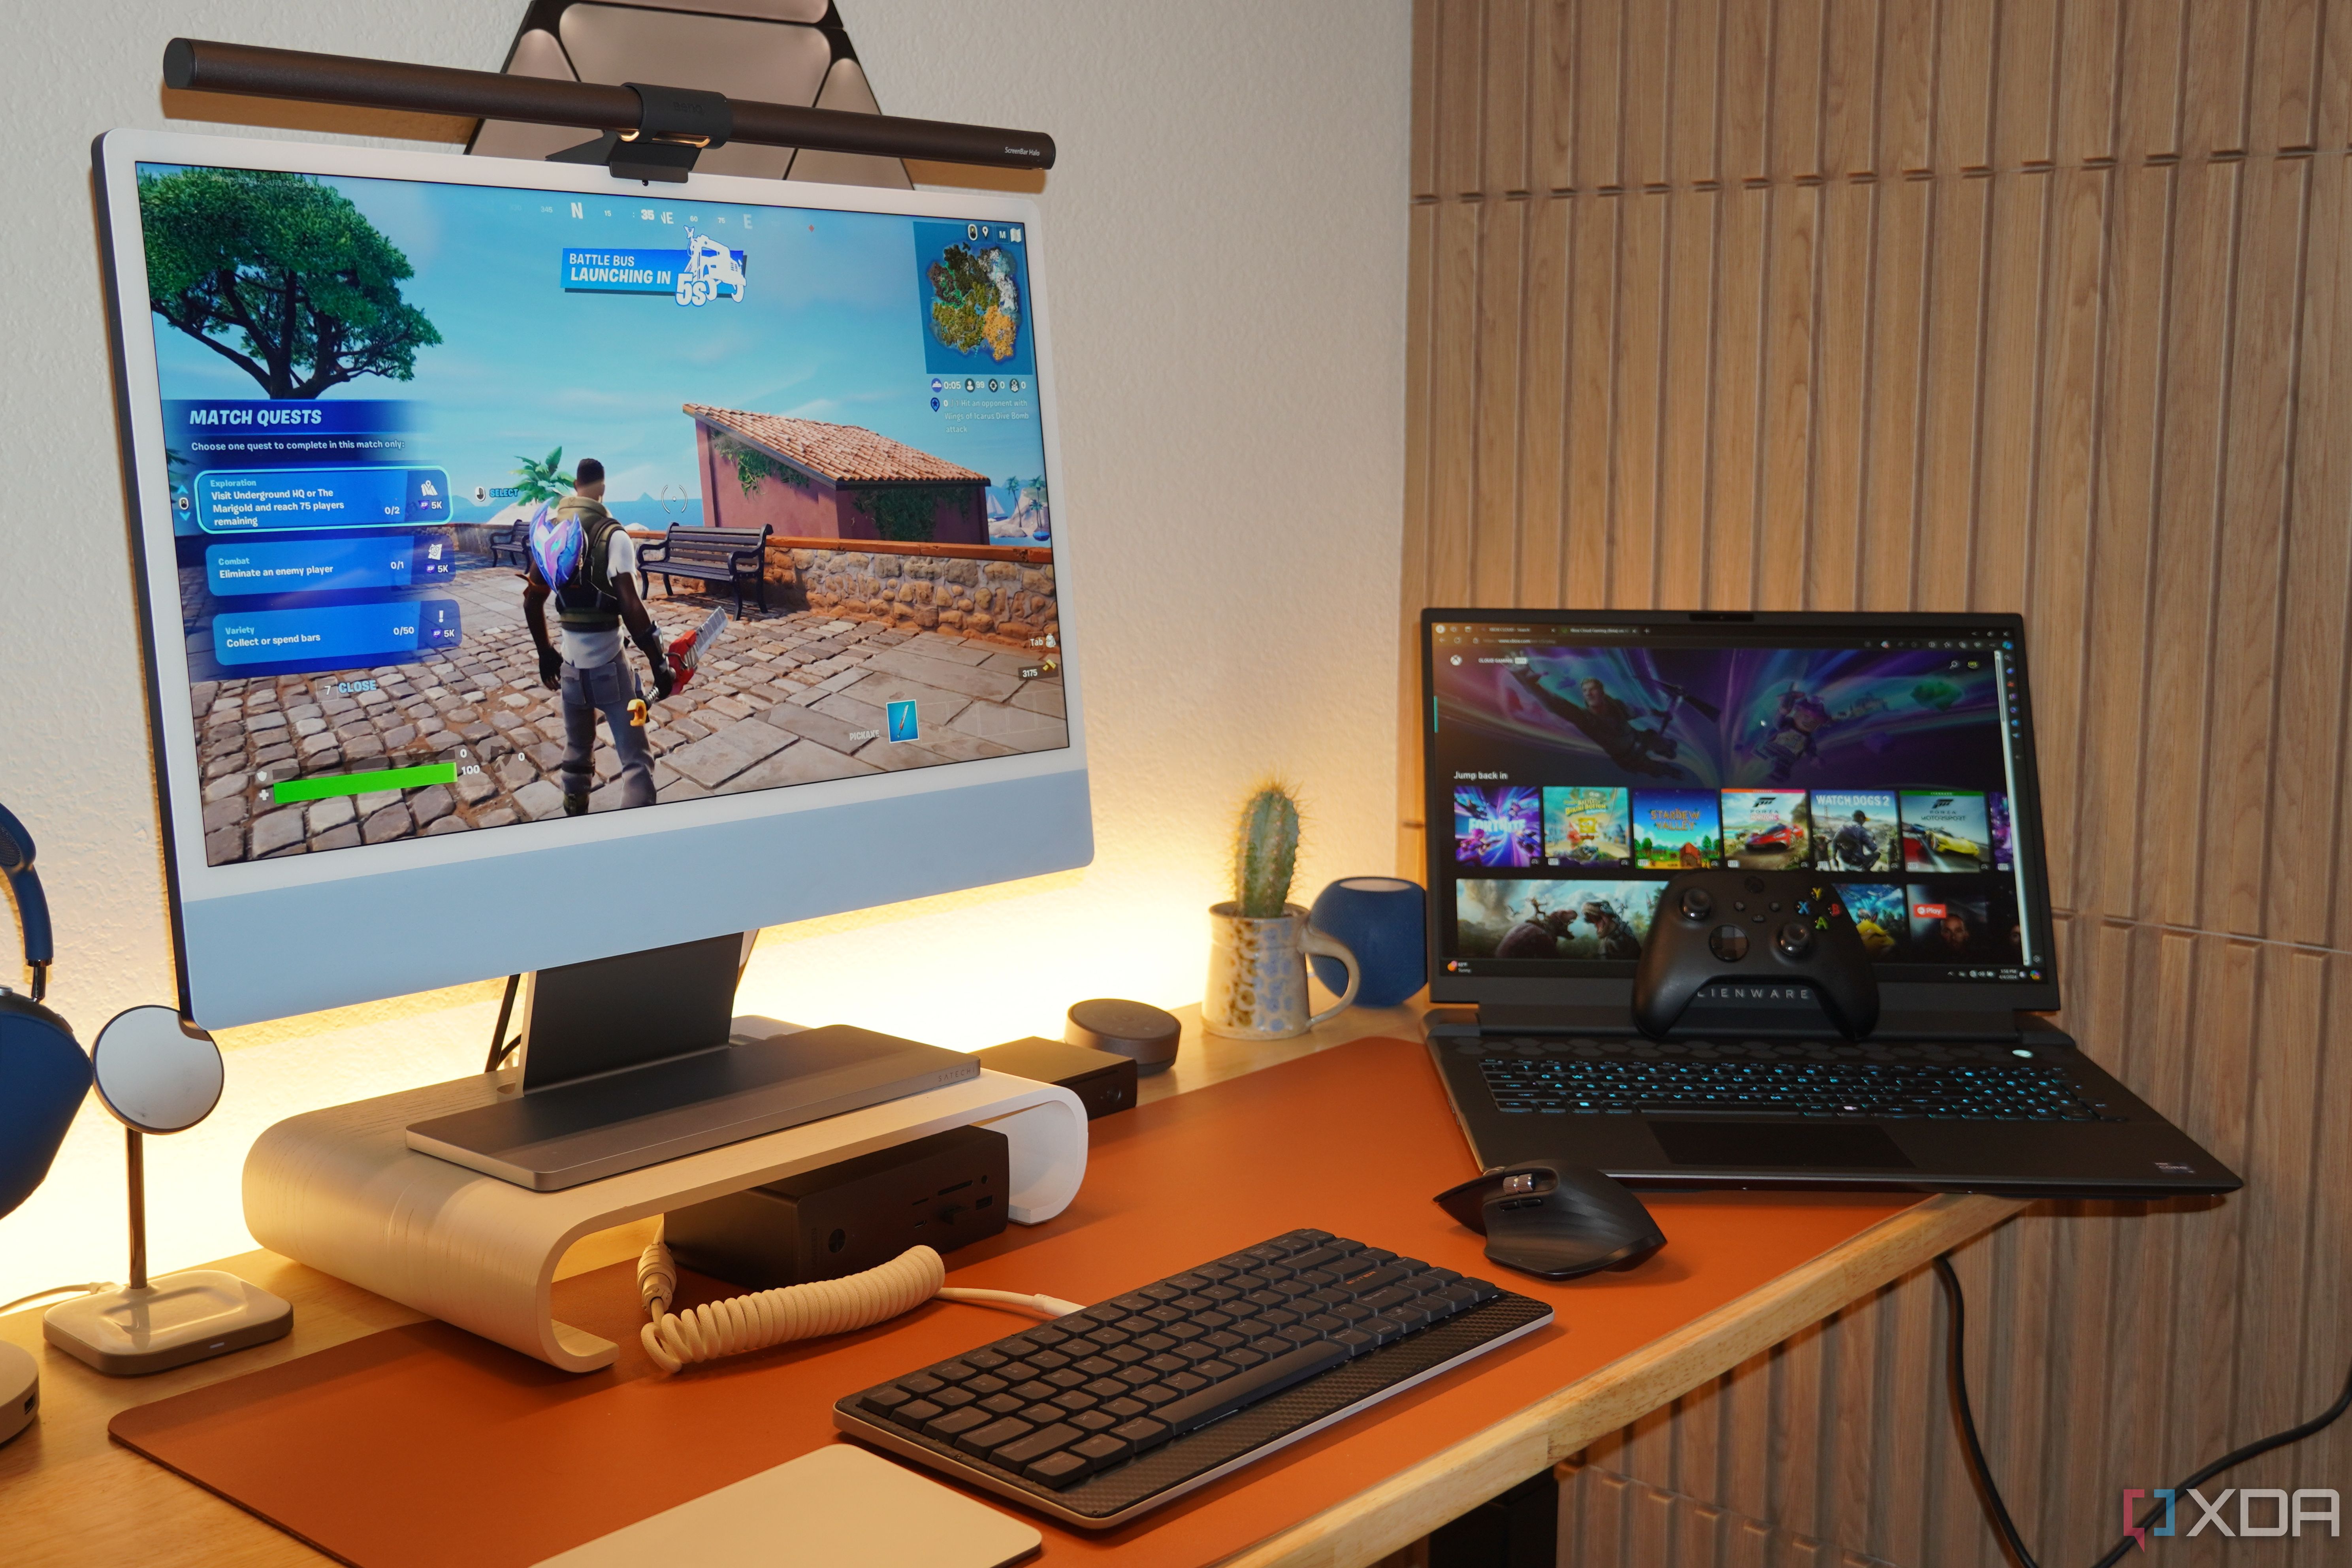 Xbox Cloud Gaming on an iMac and an Alienware laptop.